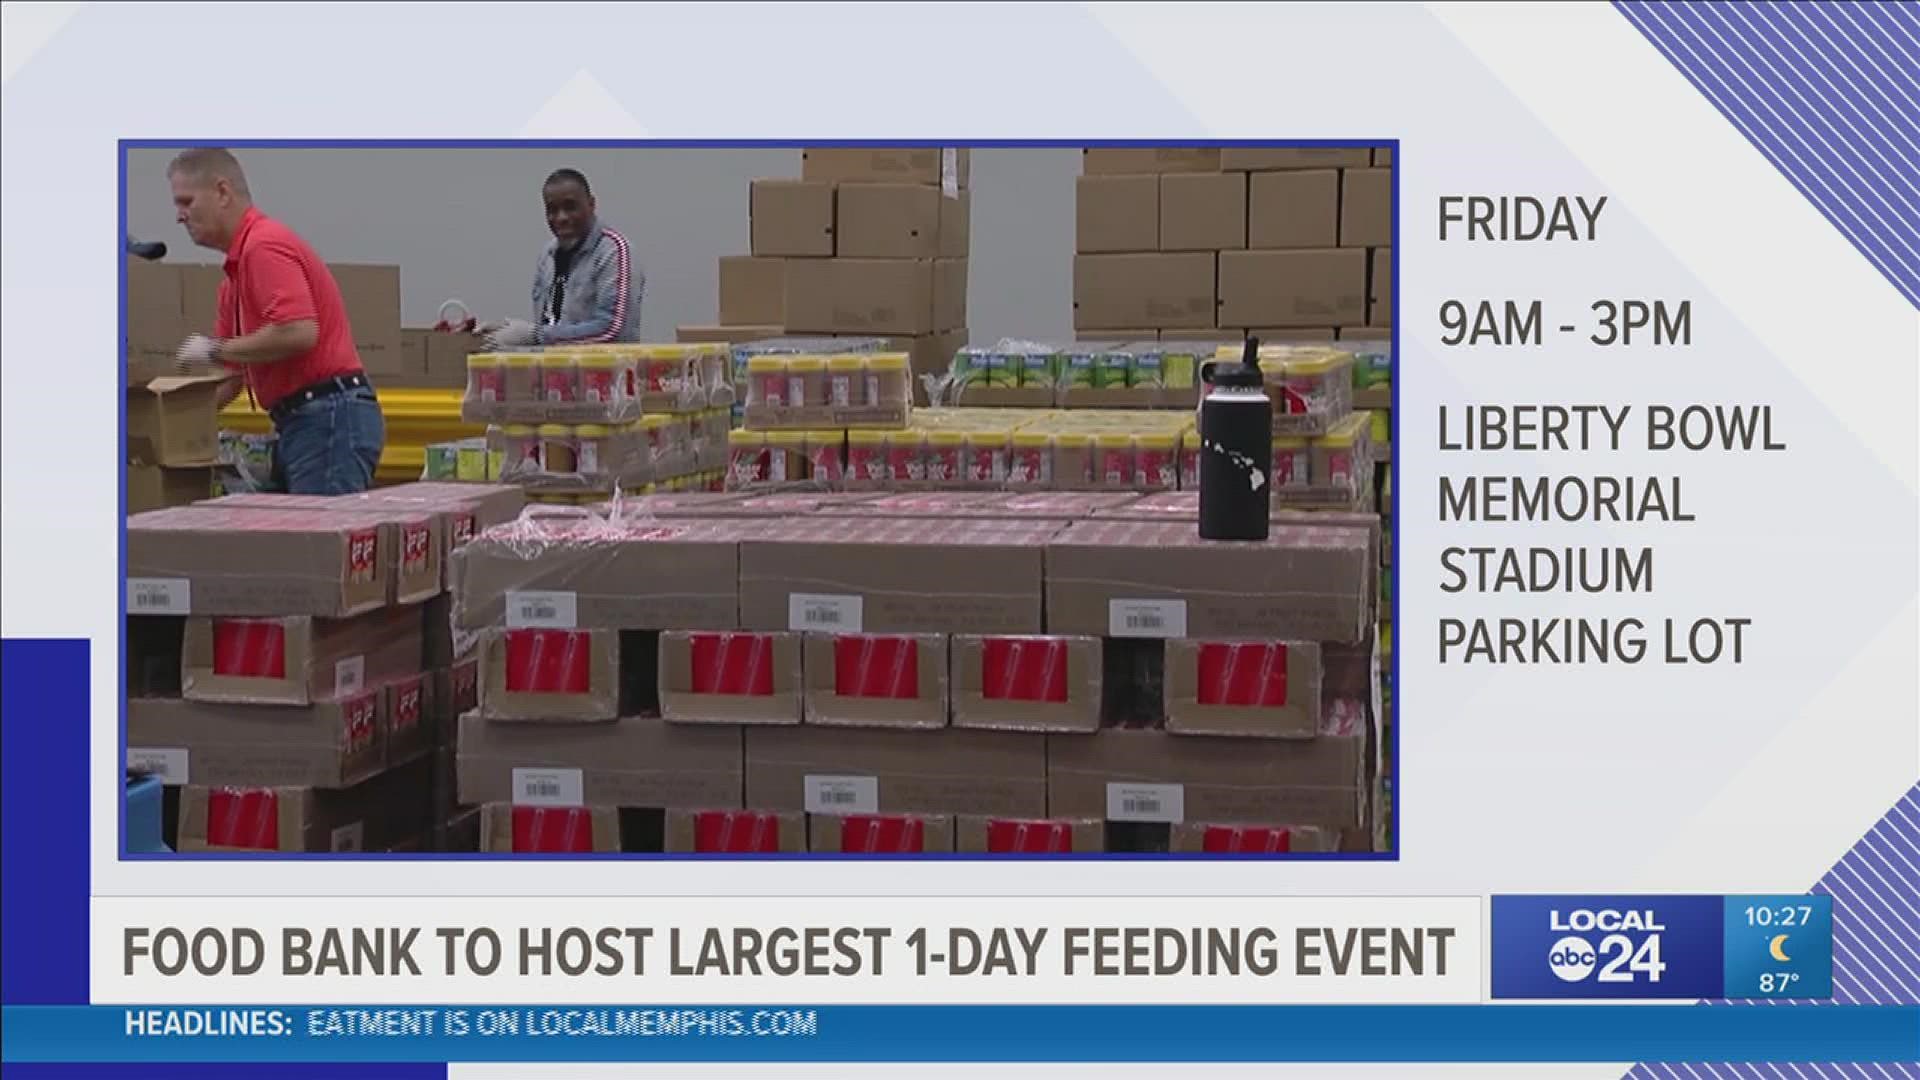 The food bank needs sponsors and volunteers, and those in need can pre-register for the City-Wide Feeding Day at the Liberty Bowl on August 27, 2021.